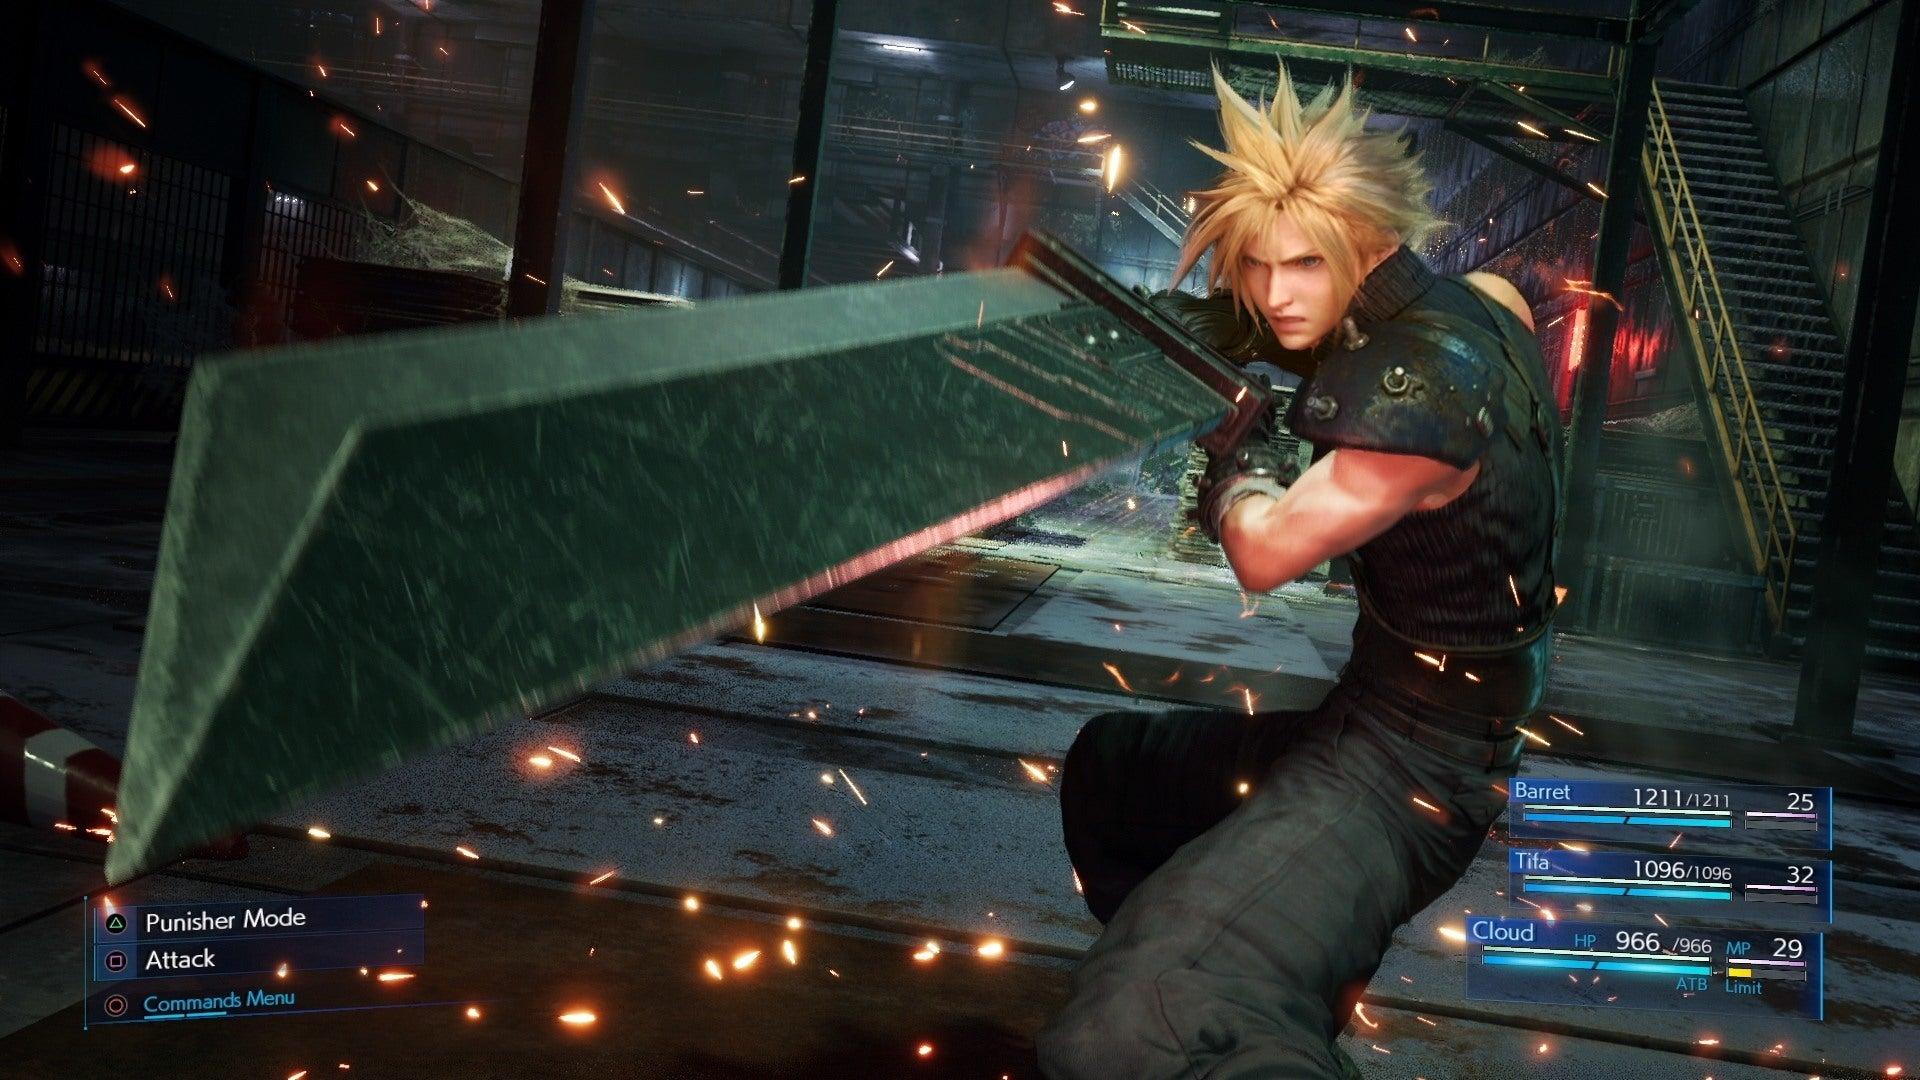 Final Fantasy VII Remake: New Screenshots and Character Art Released